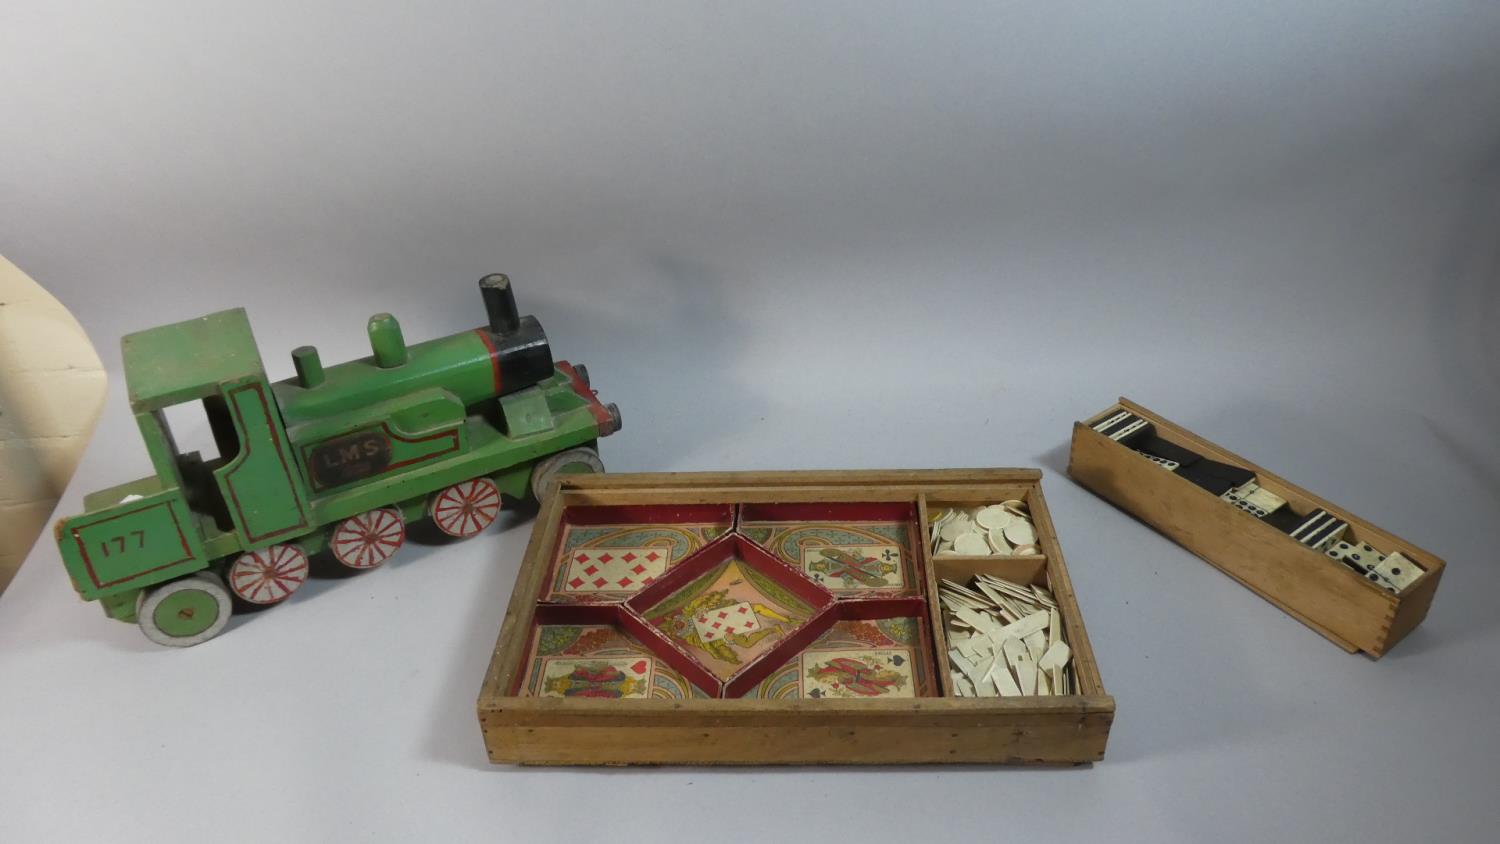 A Handmade Wooden Model of an LMS Locomotive, 39cm Long a Wooden Box Containing Dominoes and a